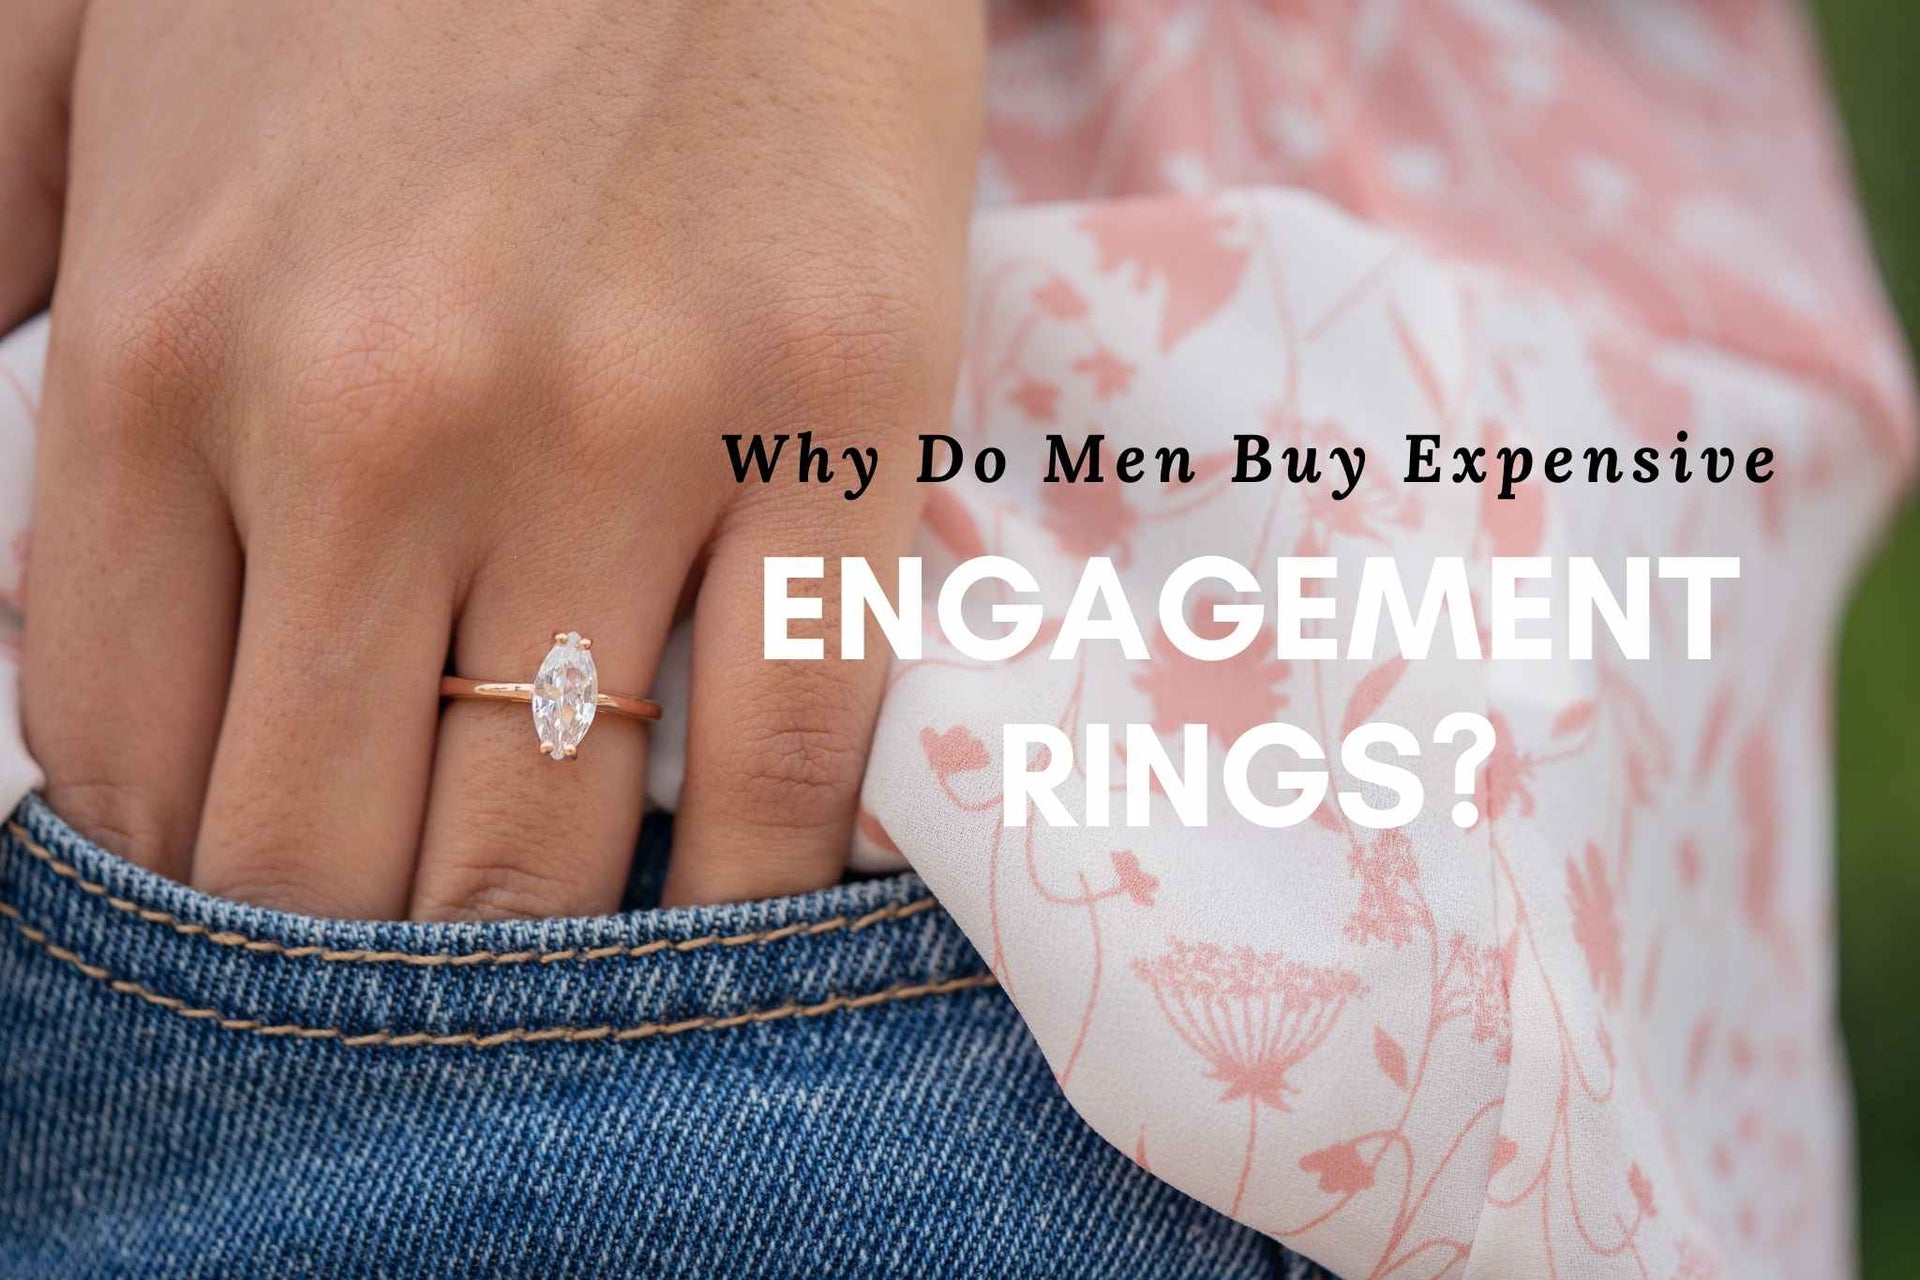 Why Do Men Feel The Need to Buy Expensive Engagement Rings?